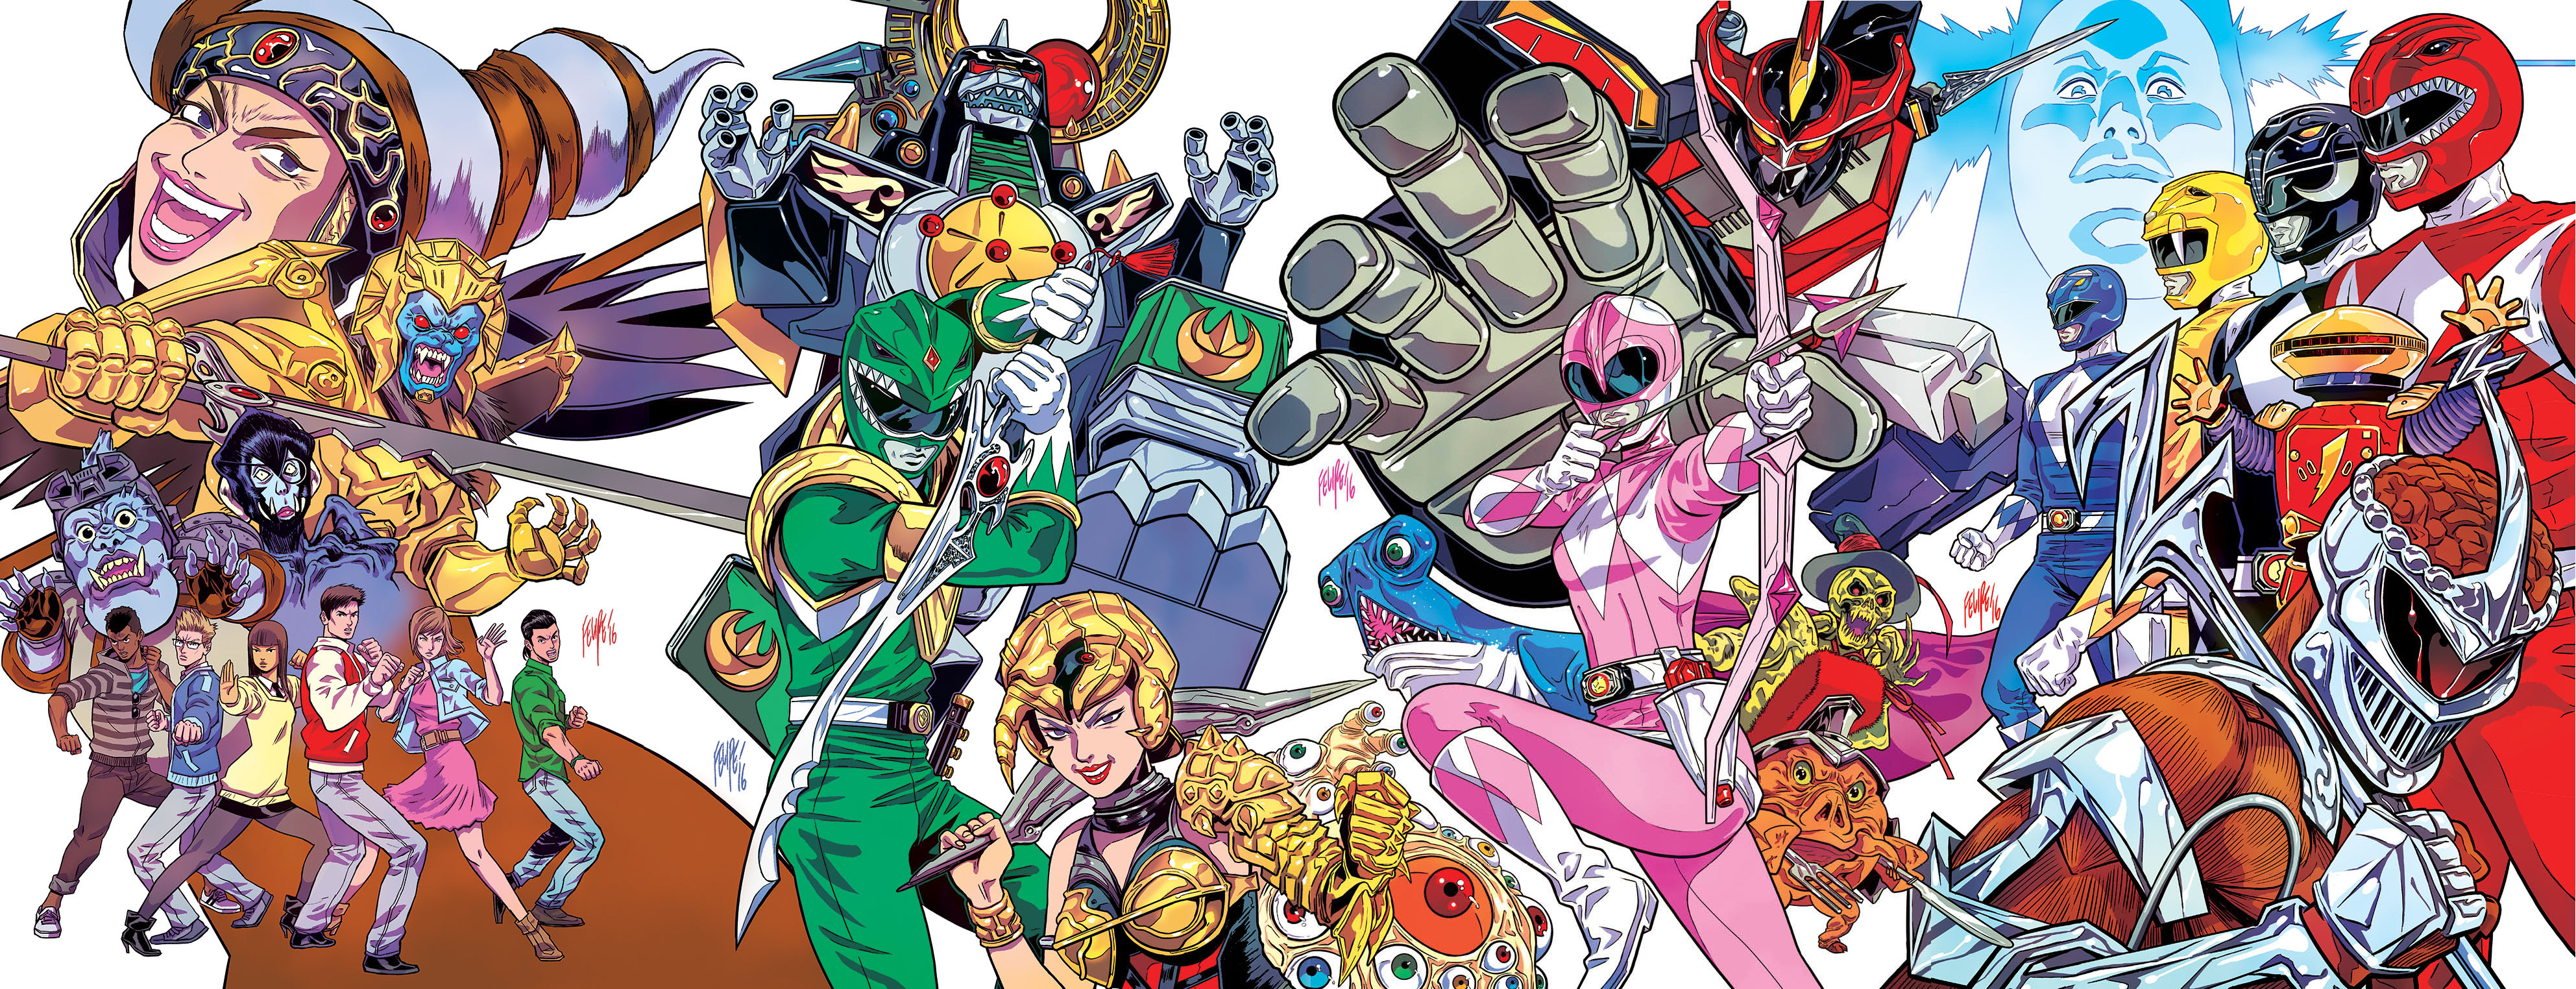 Mighty Morphin Power Rangers 2016 Annual NYCC Exclusive Publisher. 